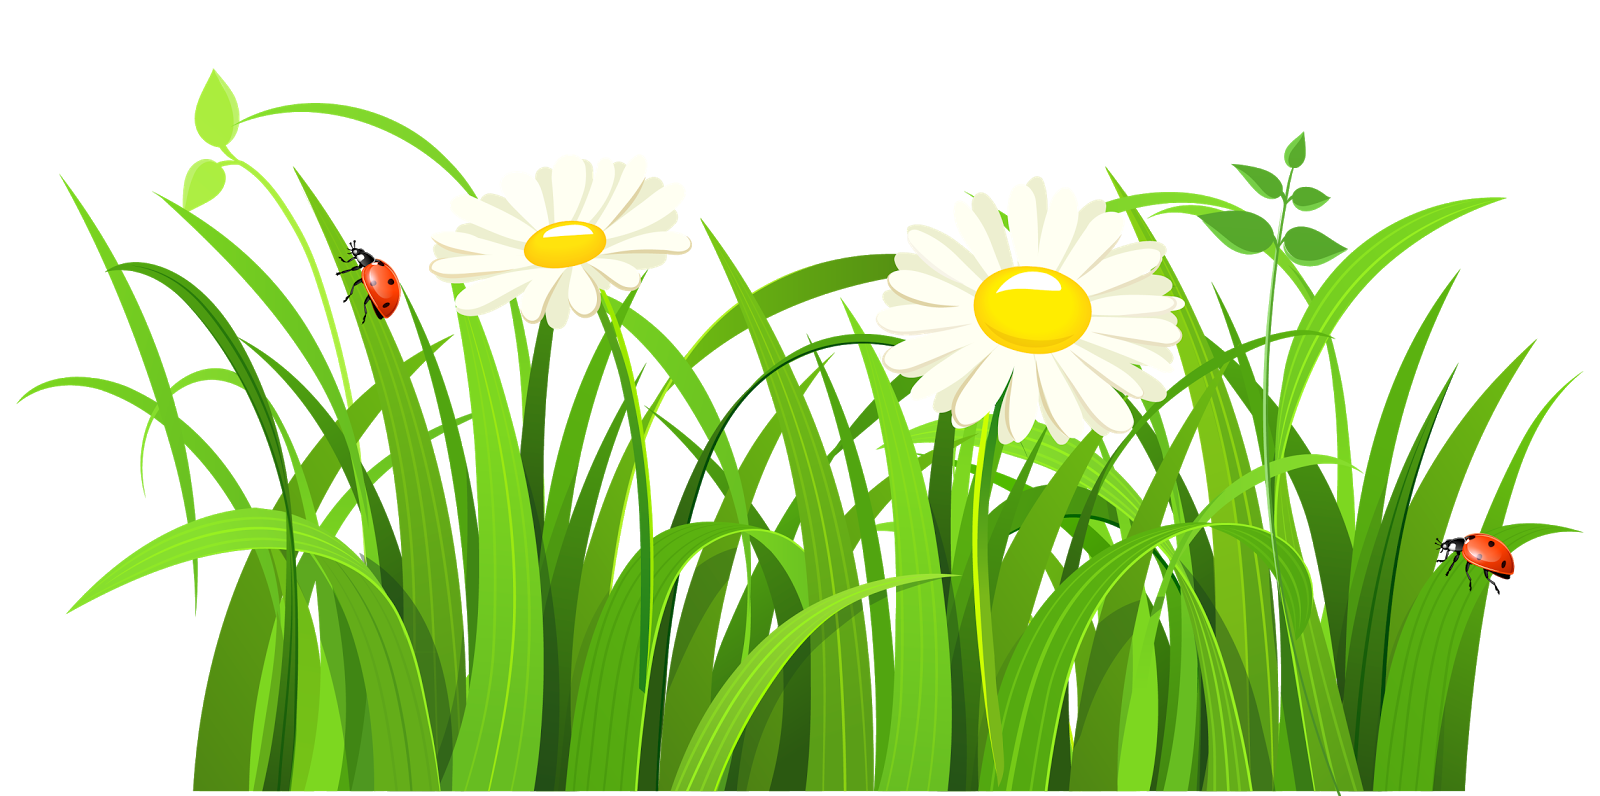 free clipart grass and flowers - photo #25